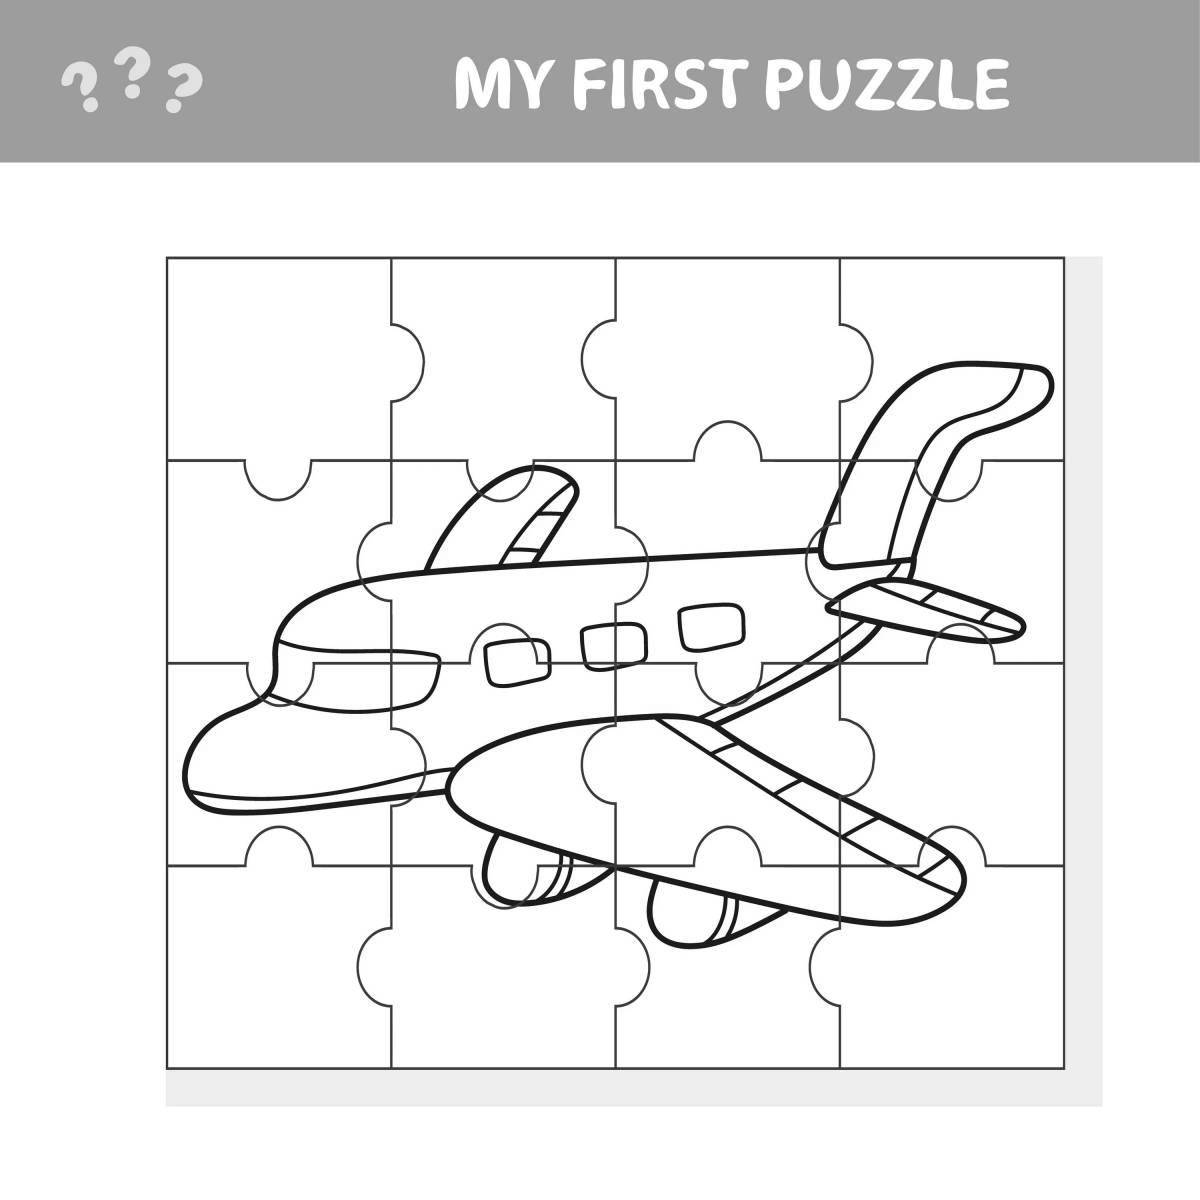 Intriguing coloring in games for children 5 years old puzzles